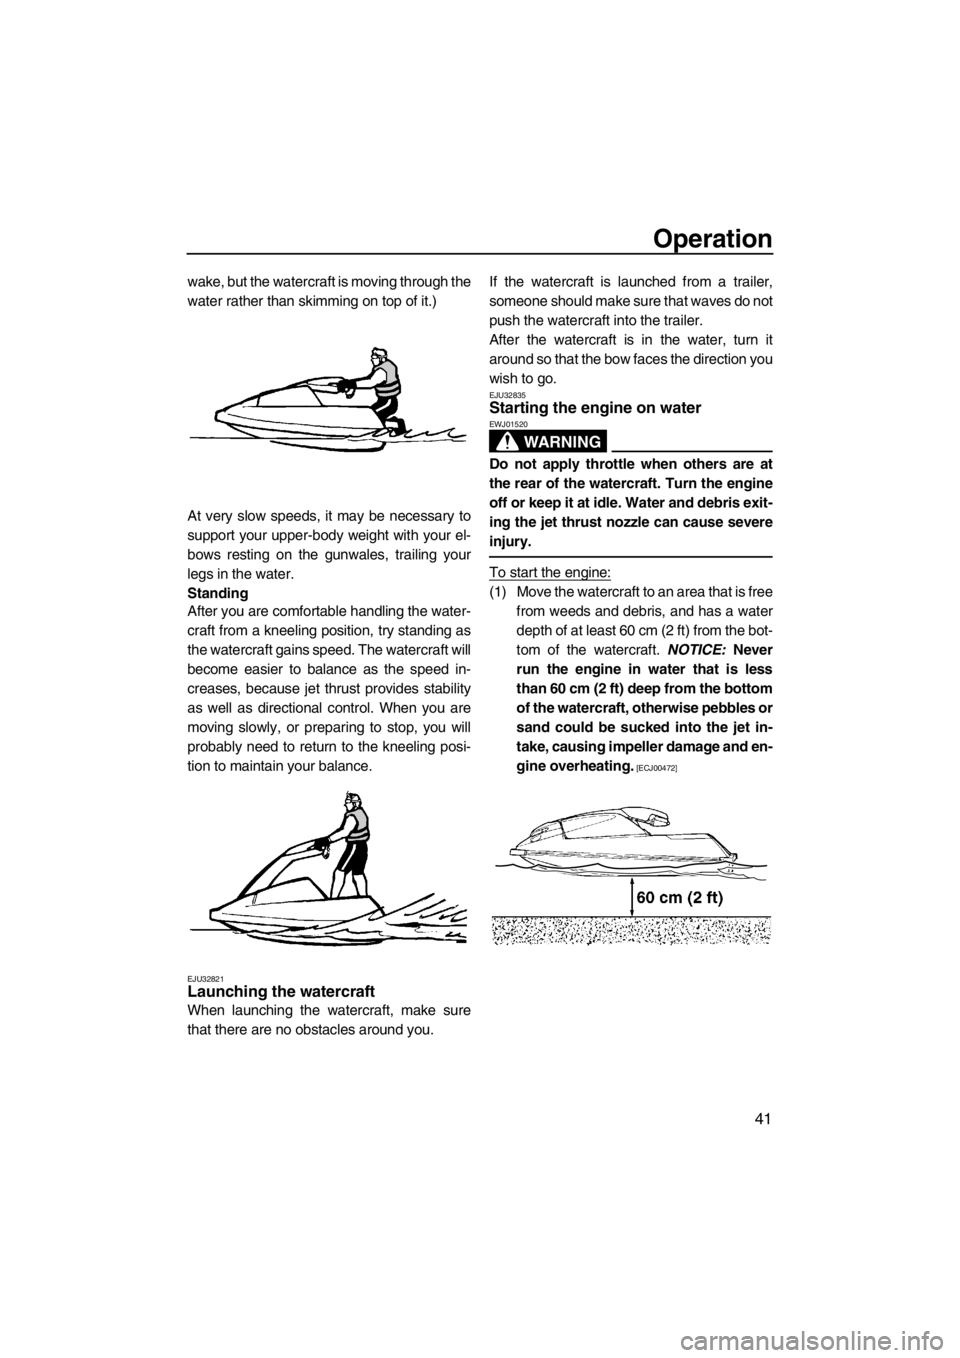 YAMAHA SUPERJET 2013 Service Manual Operation
41
wake, but the watercraft is moving through the
water rather than skimming on top of it.)
At very slow speeds, it may be necessary to
support your upper-body weight with your el-
bows rest